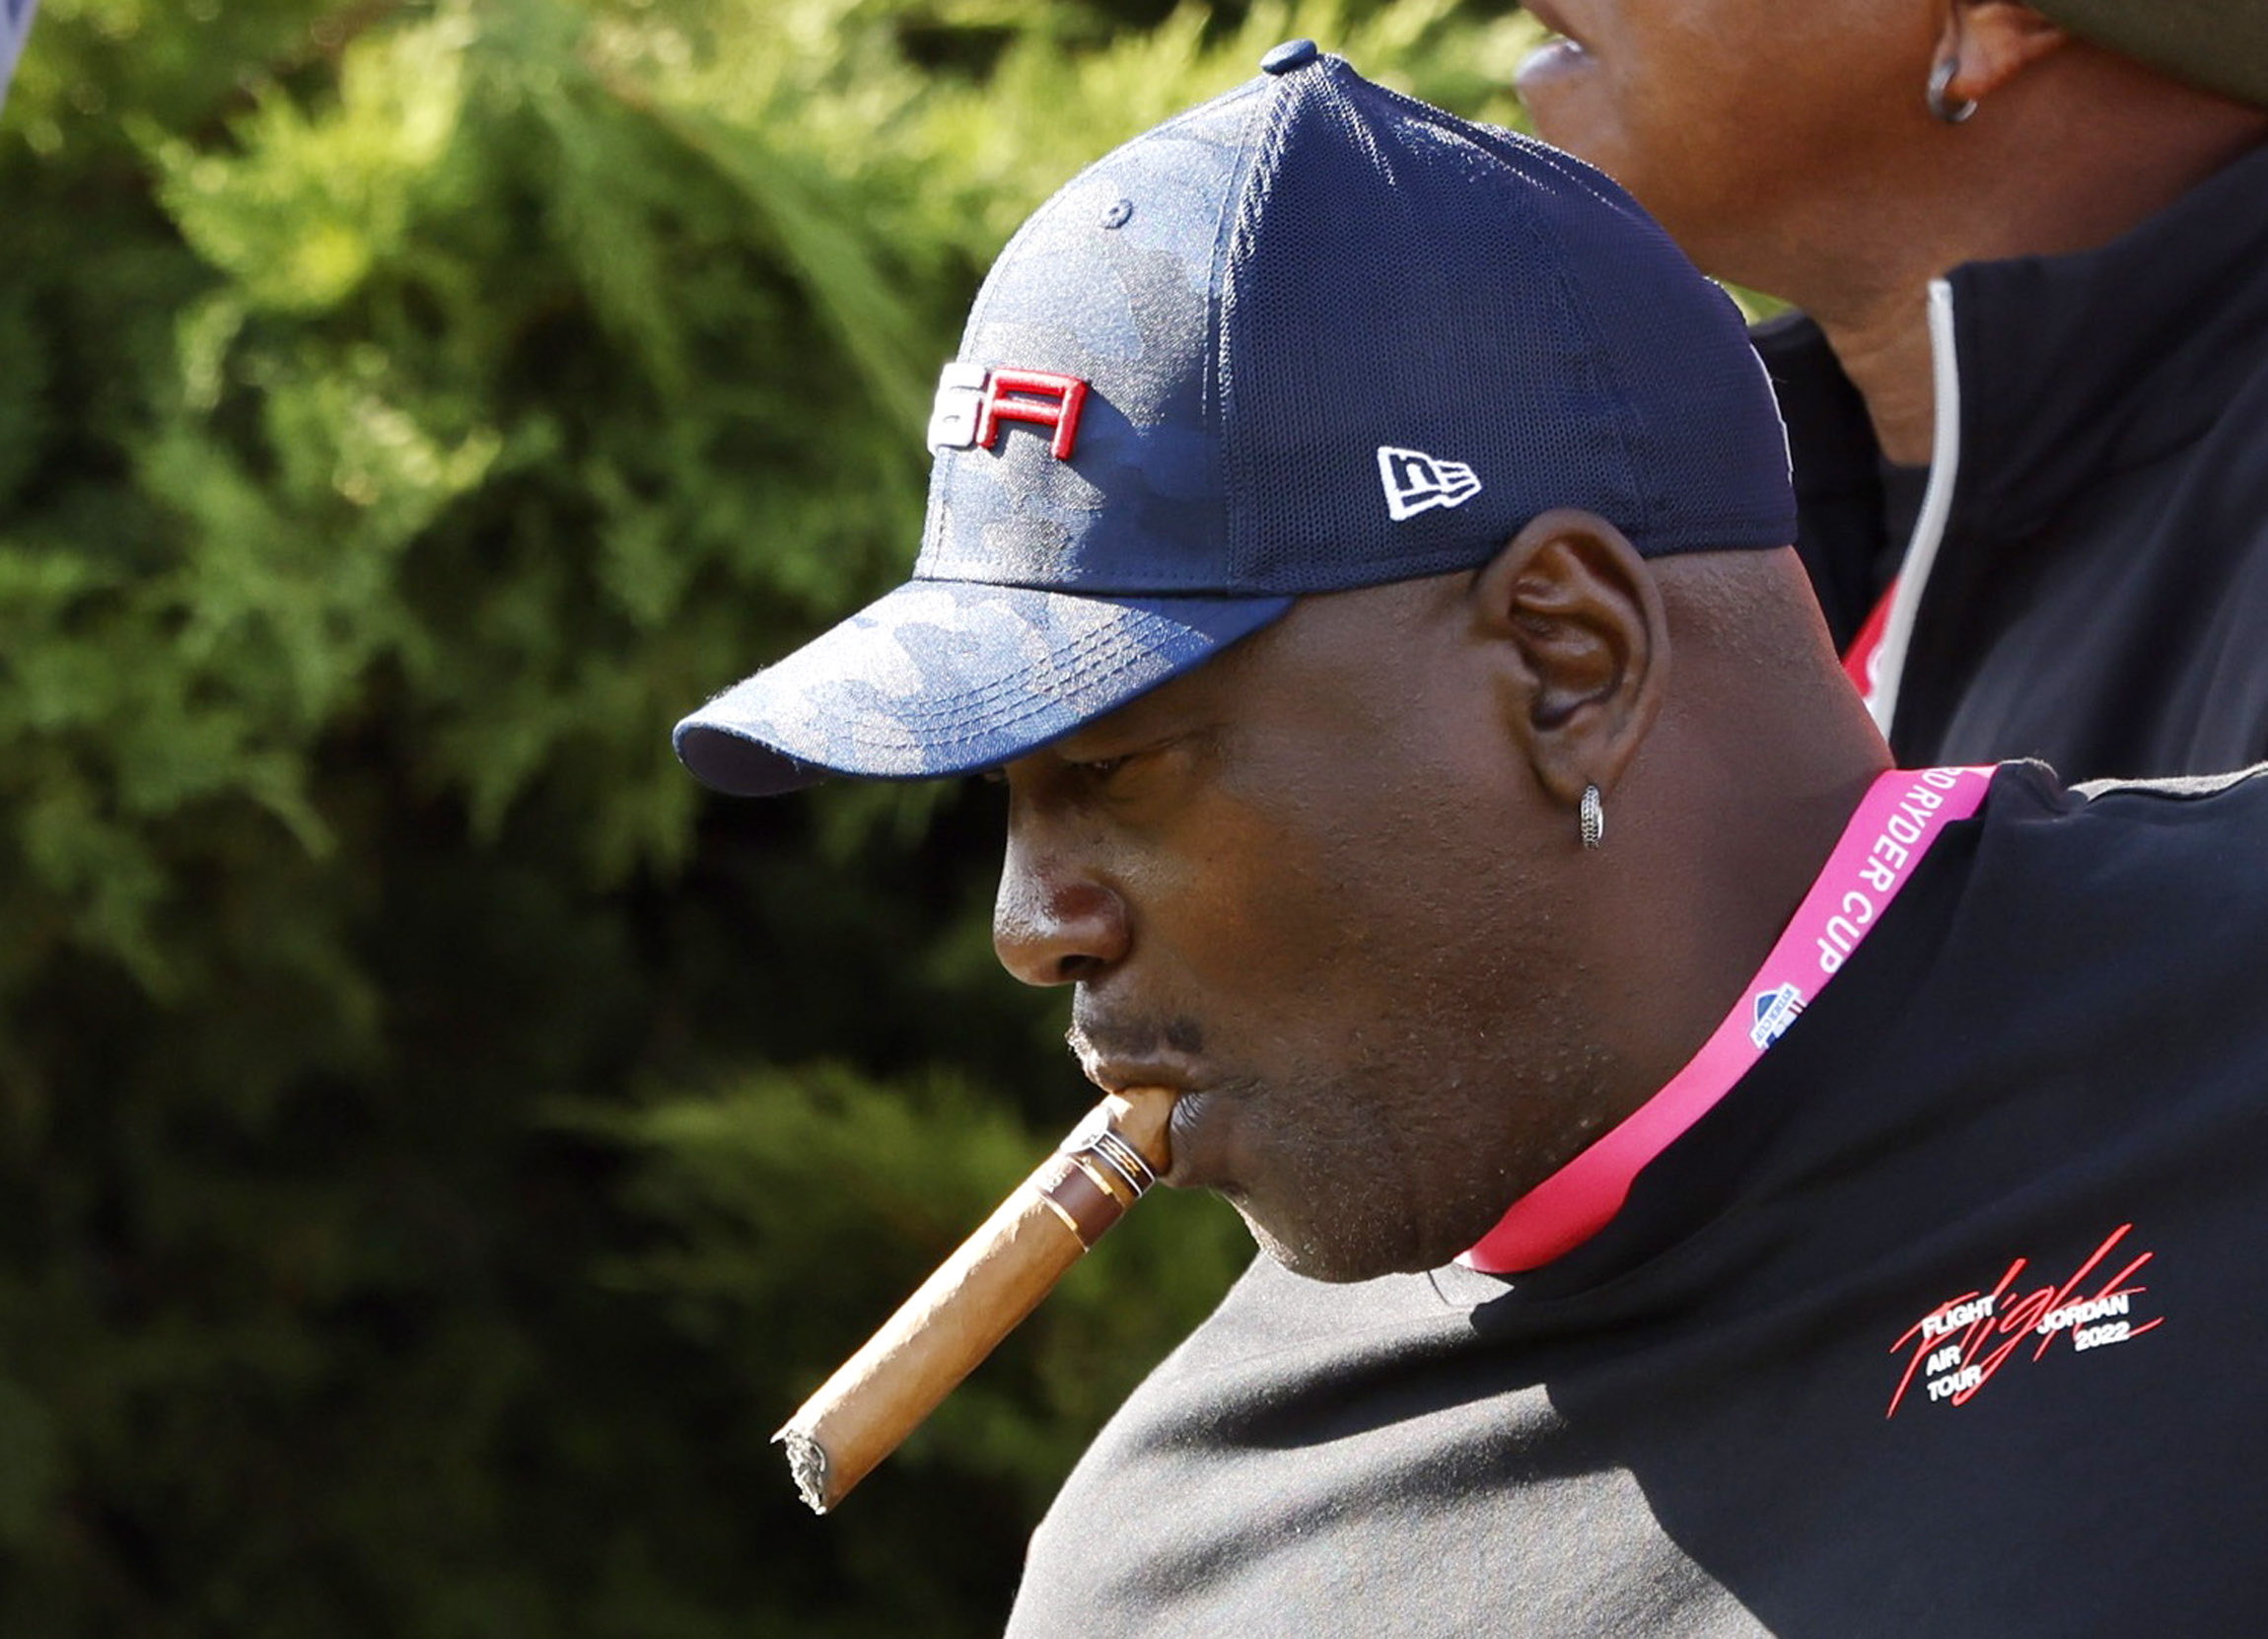 Jordan reacts in style to CLUTCH Johnson putt at the Ryder Cup GolfMagic